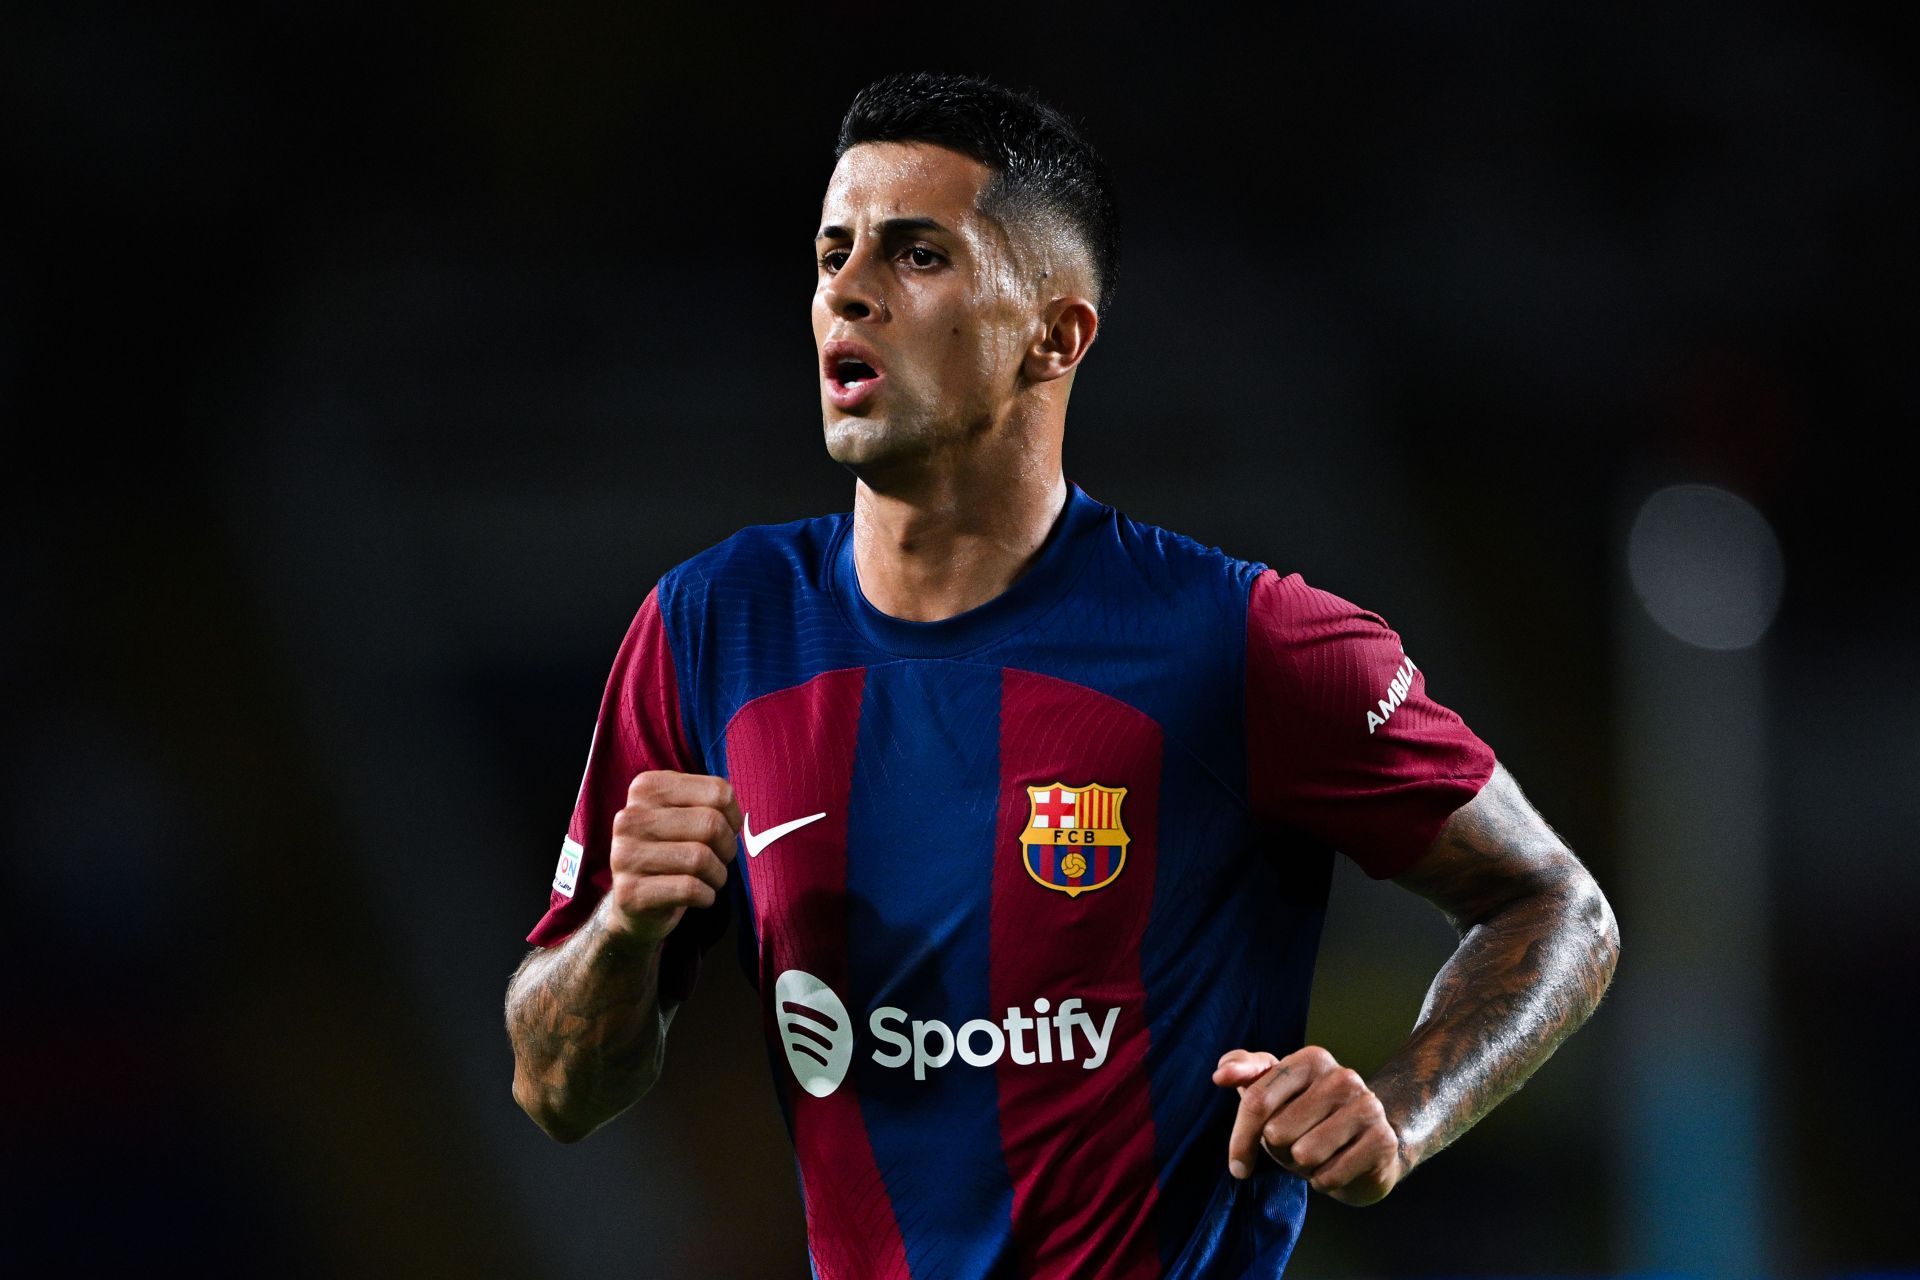 Joao Cancelo has been a hit at the Camp Nou.